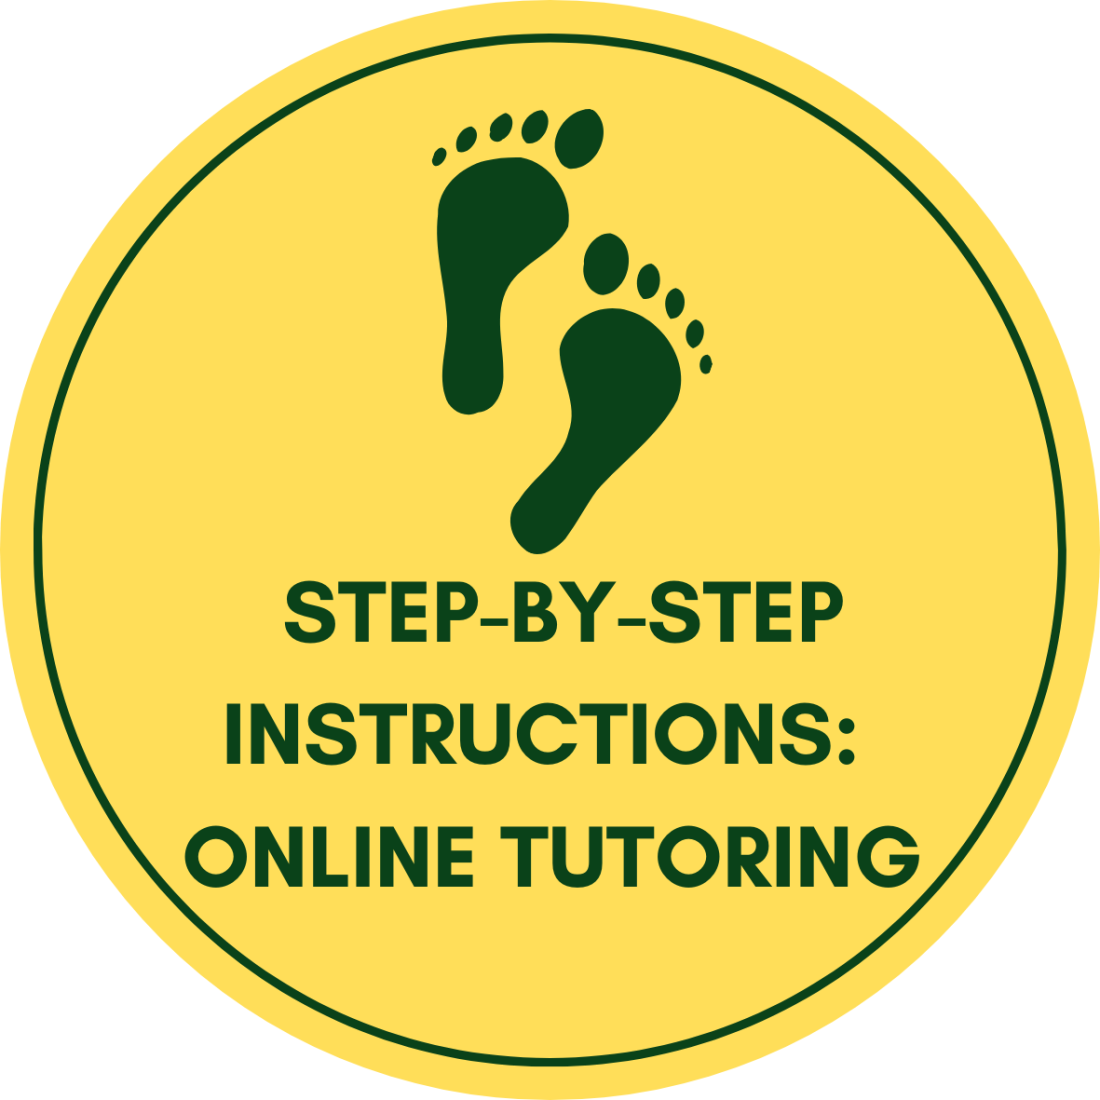 Step by Step Instructions: Online Tutoring